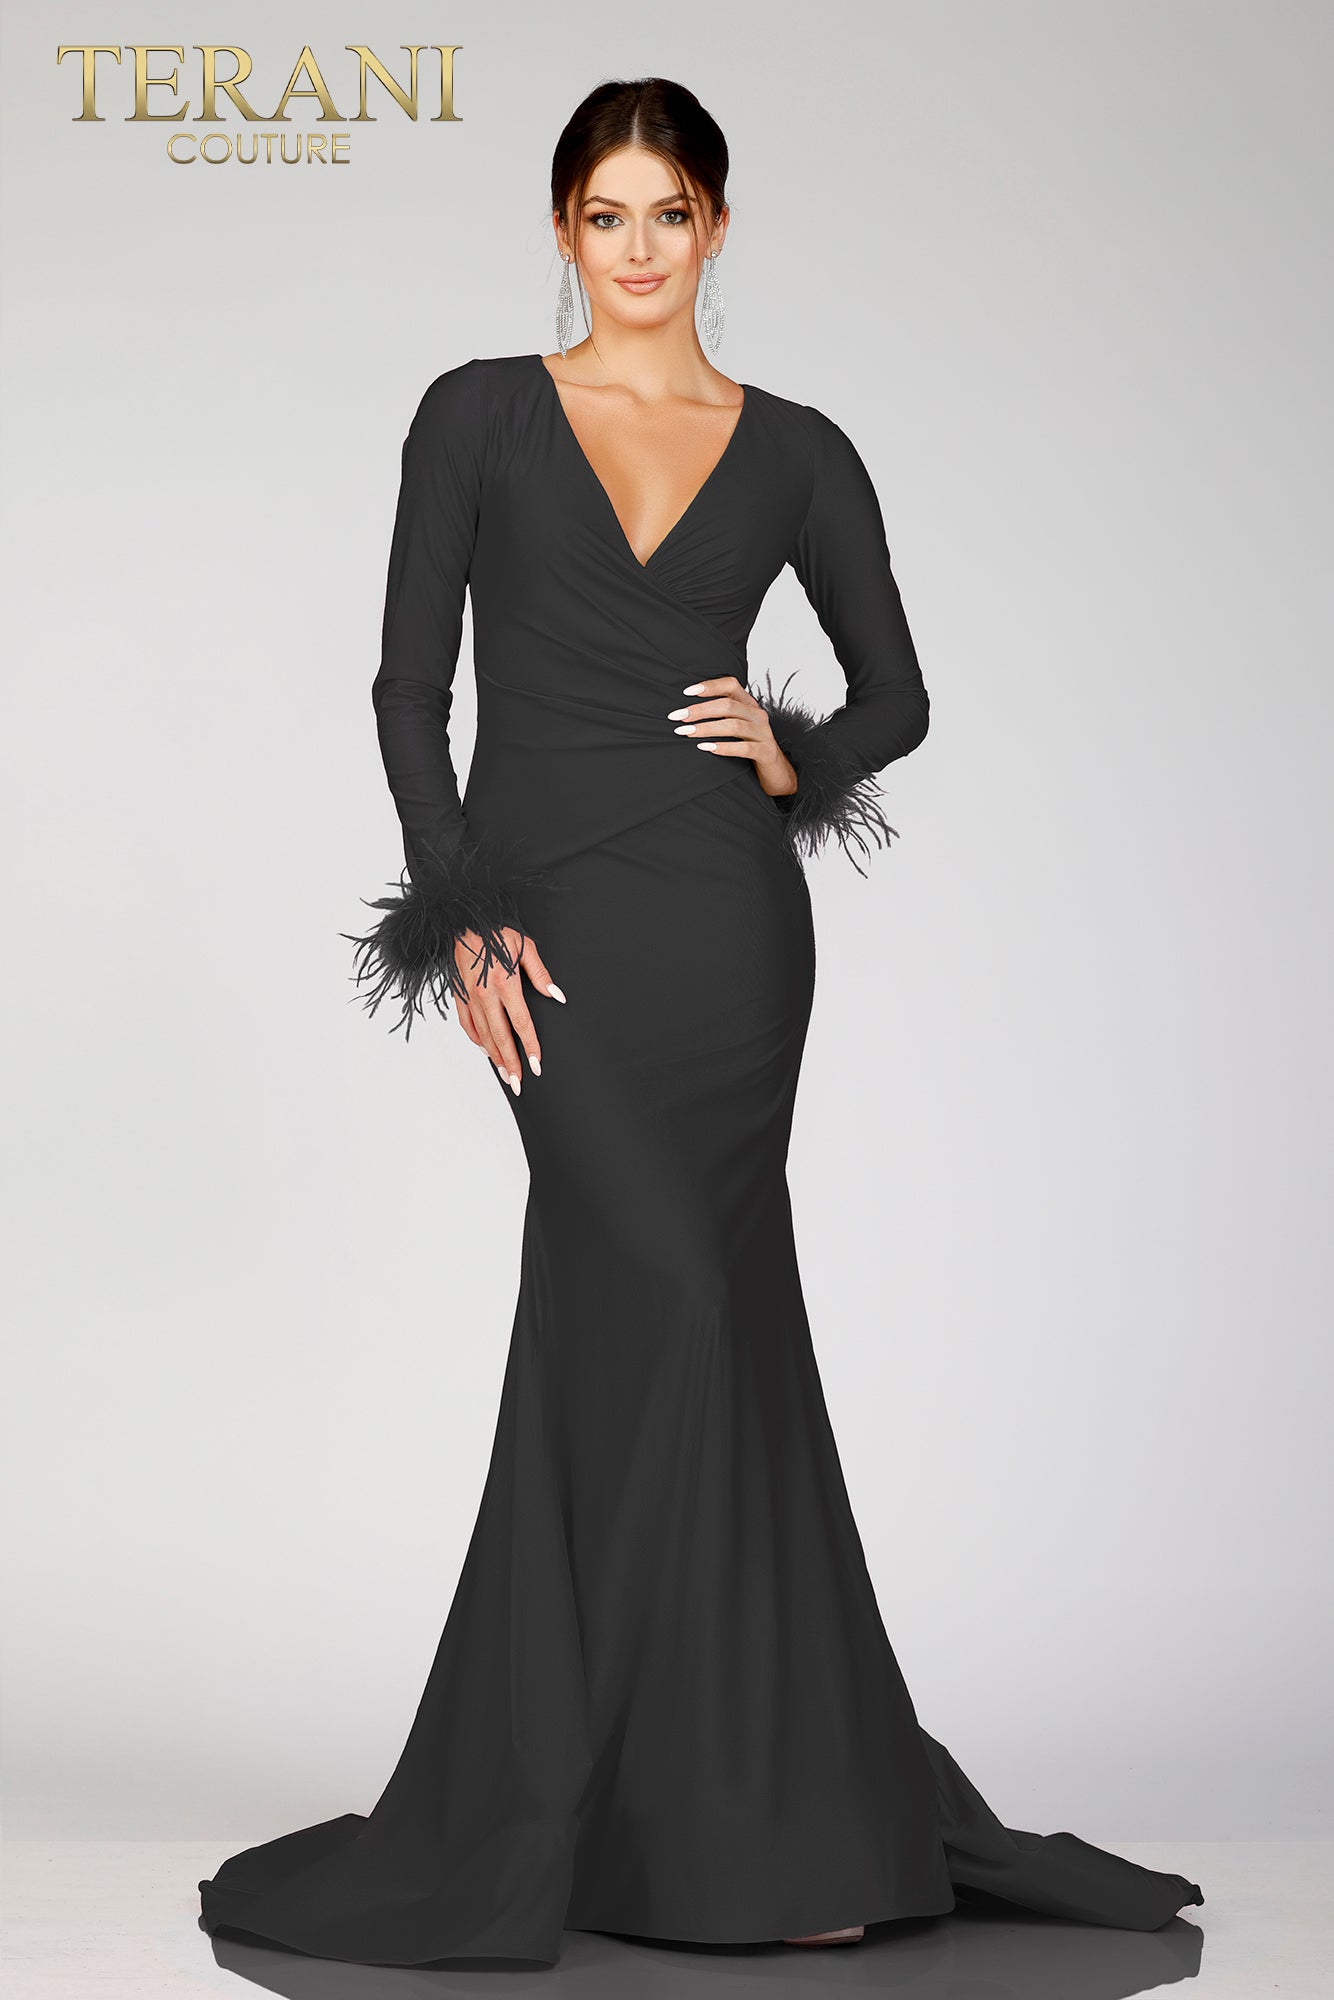 Sexy Evening Prom Gown Birthday Gloves Black Velvet Hollow Backless Bodycon Long  Dress Nightclub Outfit Show Stage Plus Size - Dresses - AliExpress